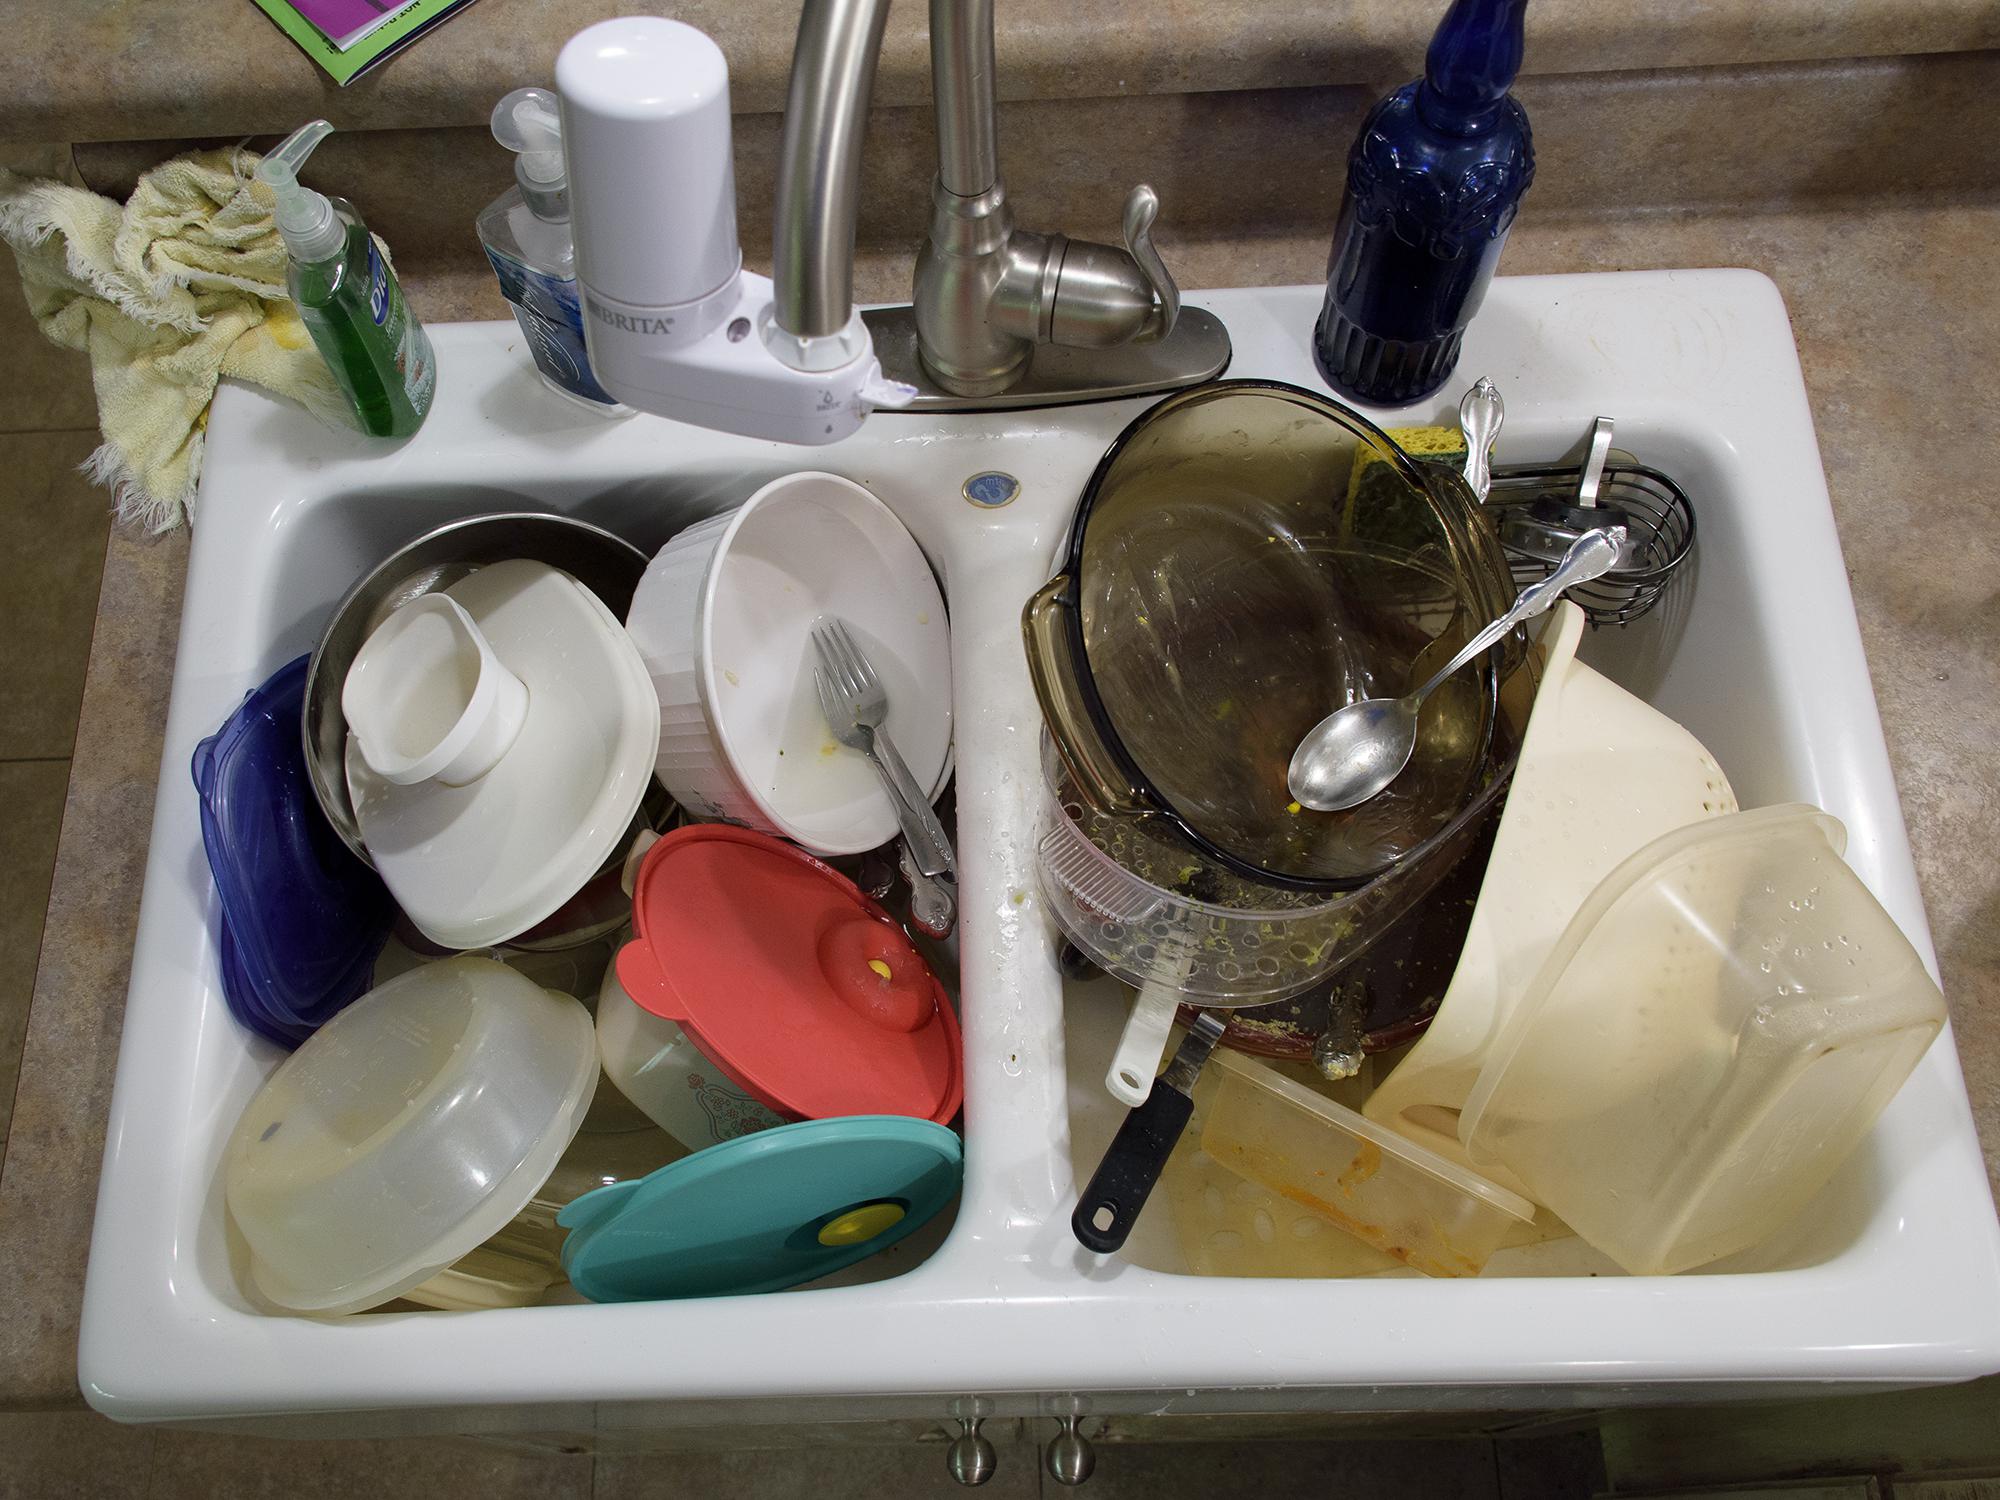 Leaving dirty dishes in the sink provides a feast for pests. Integrated pest management emphasizes practical, cost-efficient strategies for keeping rodents and insects out of the home. (Photo by MSU Extension Service/Kevin Hudson)